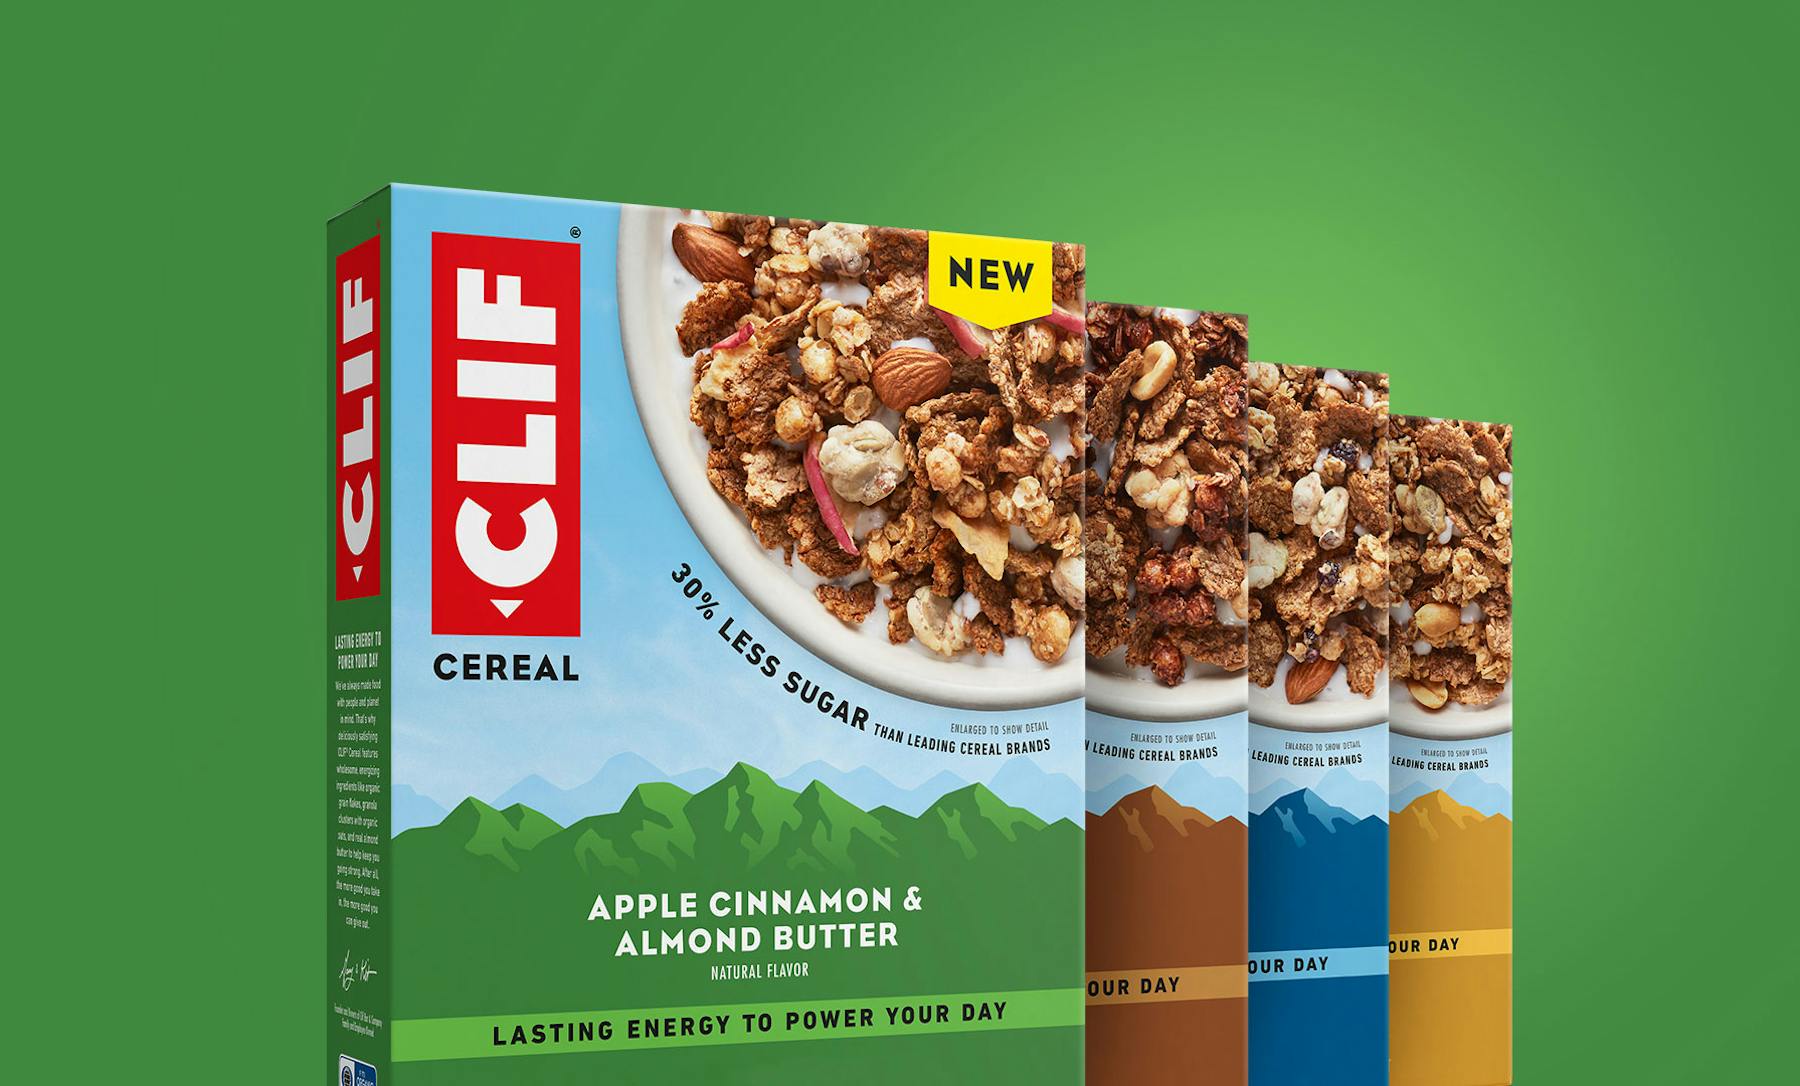 CLIF Cereal 4 new flavors